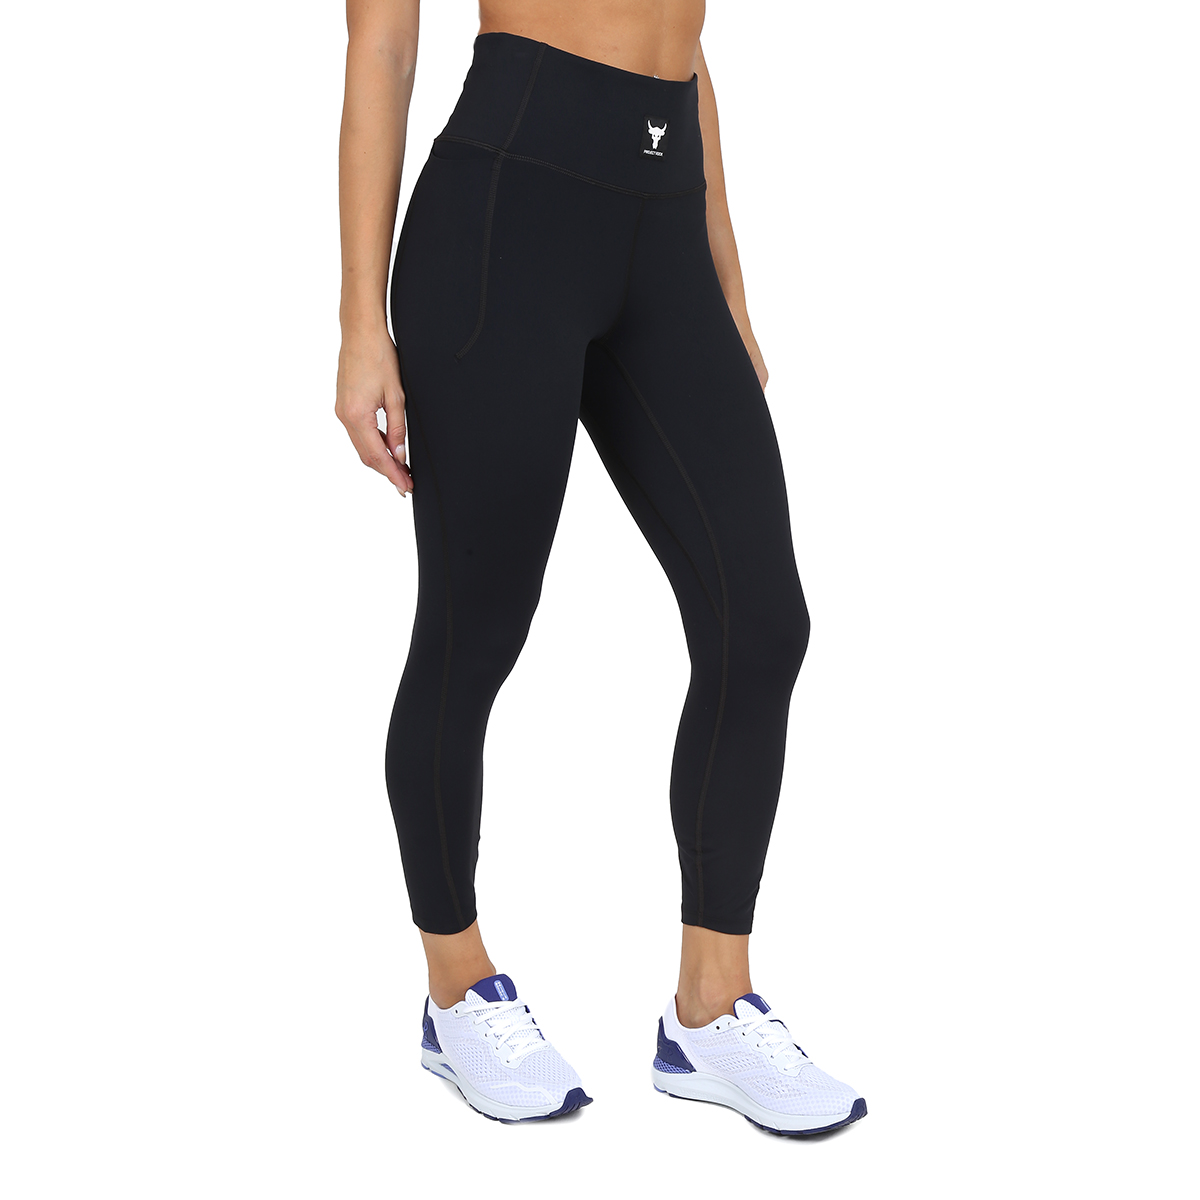 Calza Entrenamiento Under Armour Pjt Rock Meridian Ankl Mujer,  image number null